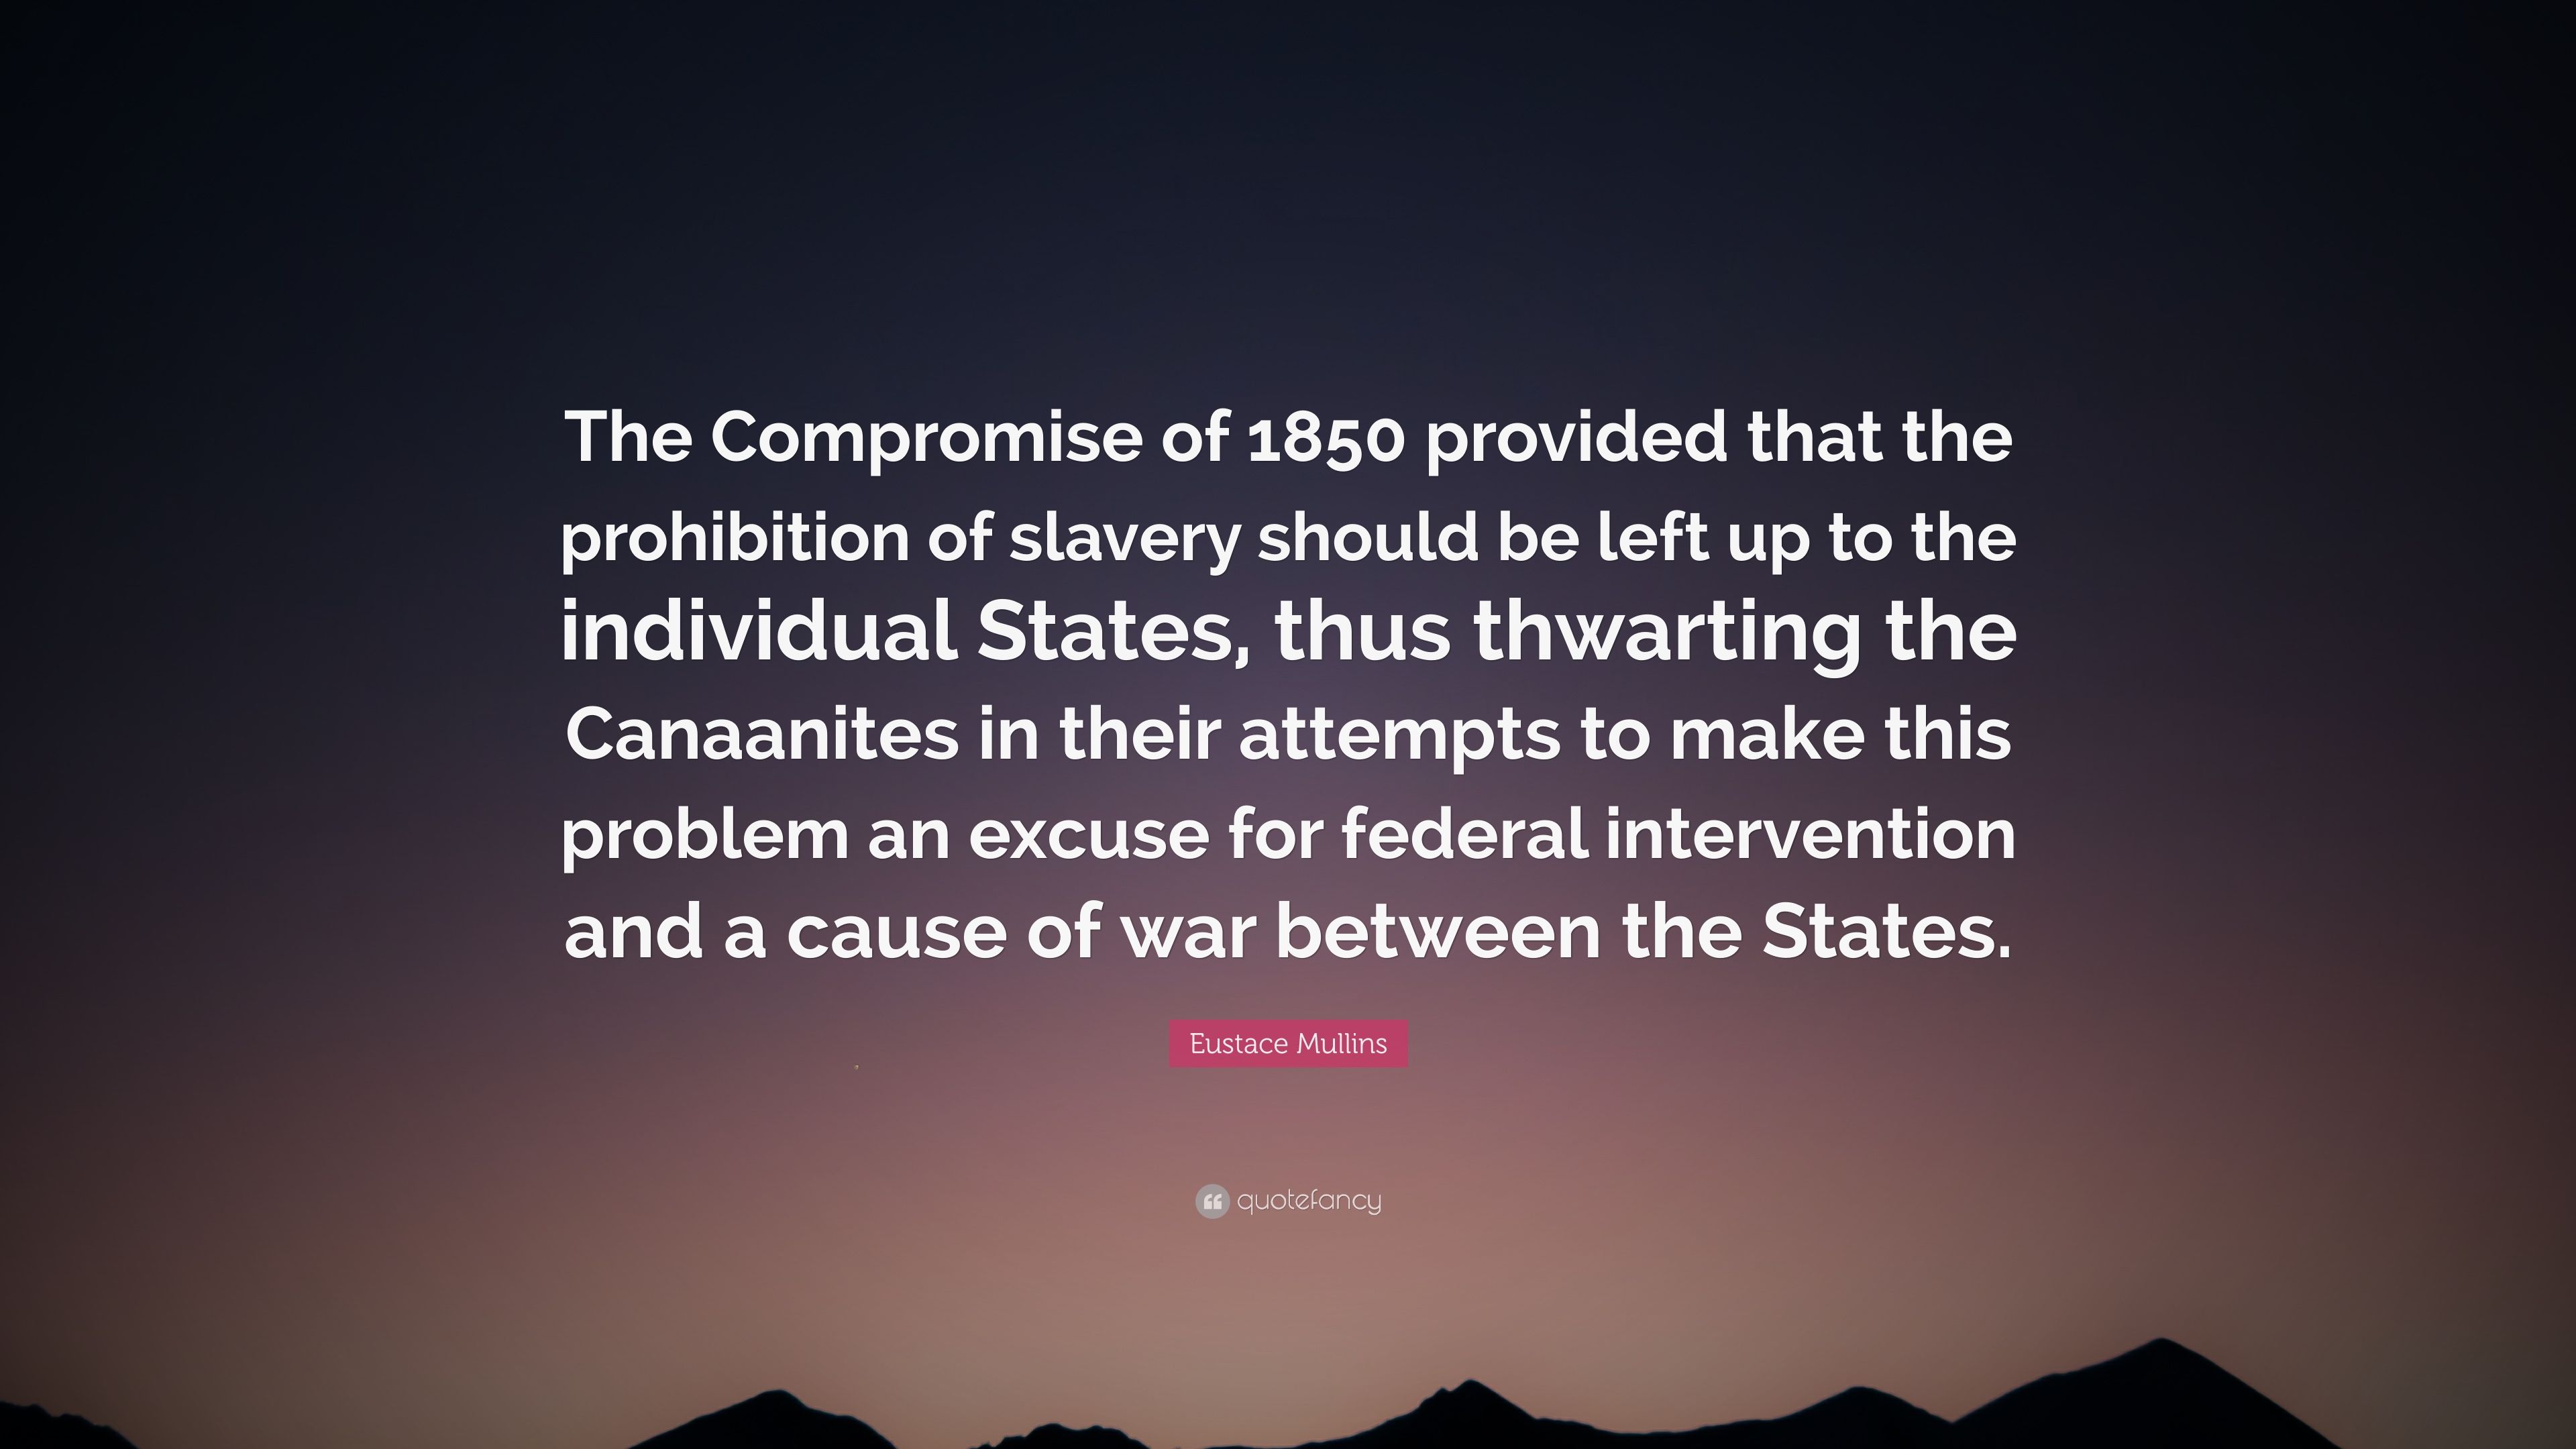 Eustace Mullins Quote: “The Compromise of 1850 provided that the prohibition of slavery should be left up to the individual States, thus thwarti.”